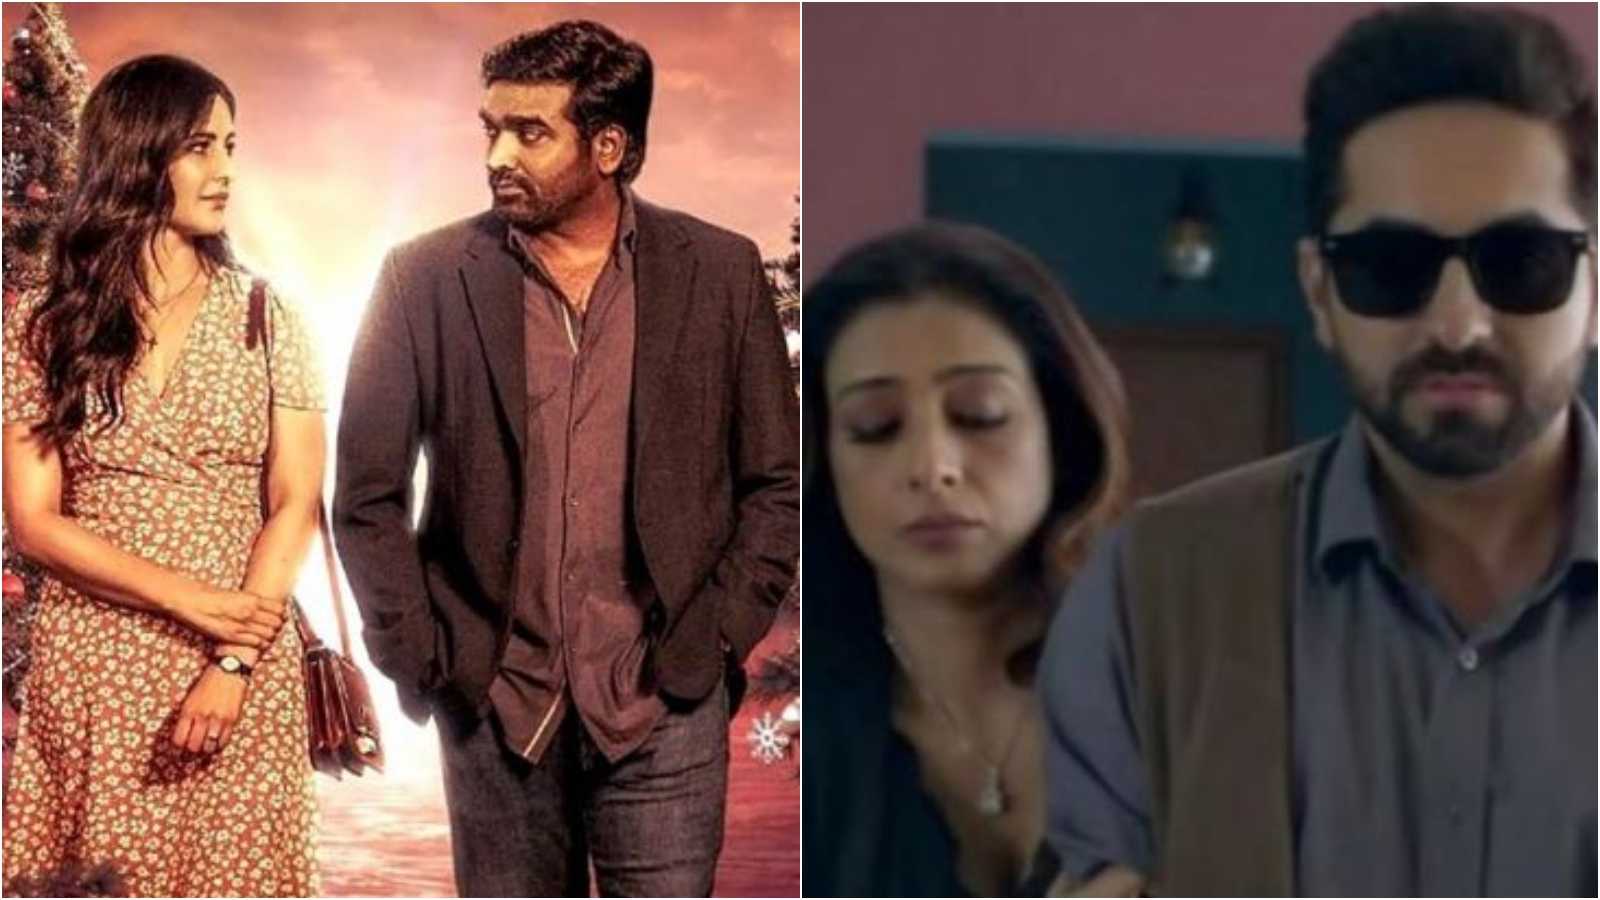 Sriram Raghavan breaks silence on comparison between Merry Christmas and Andhadhun: 'This pace was required'